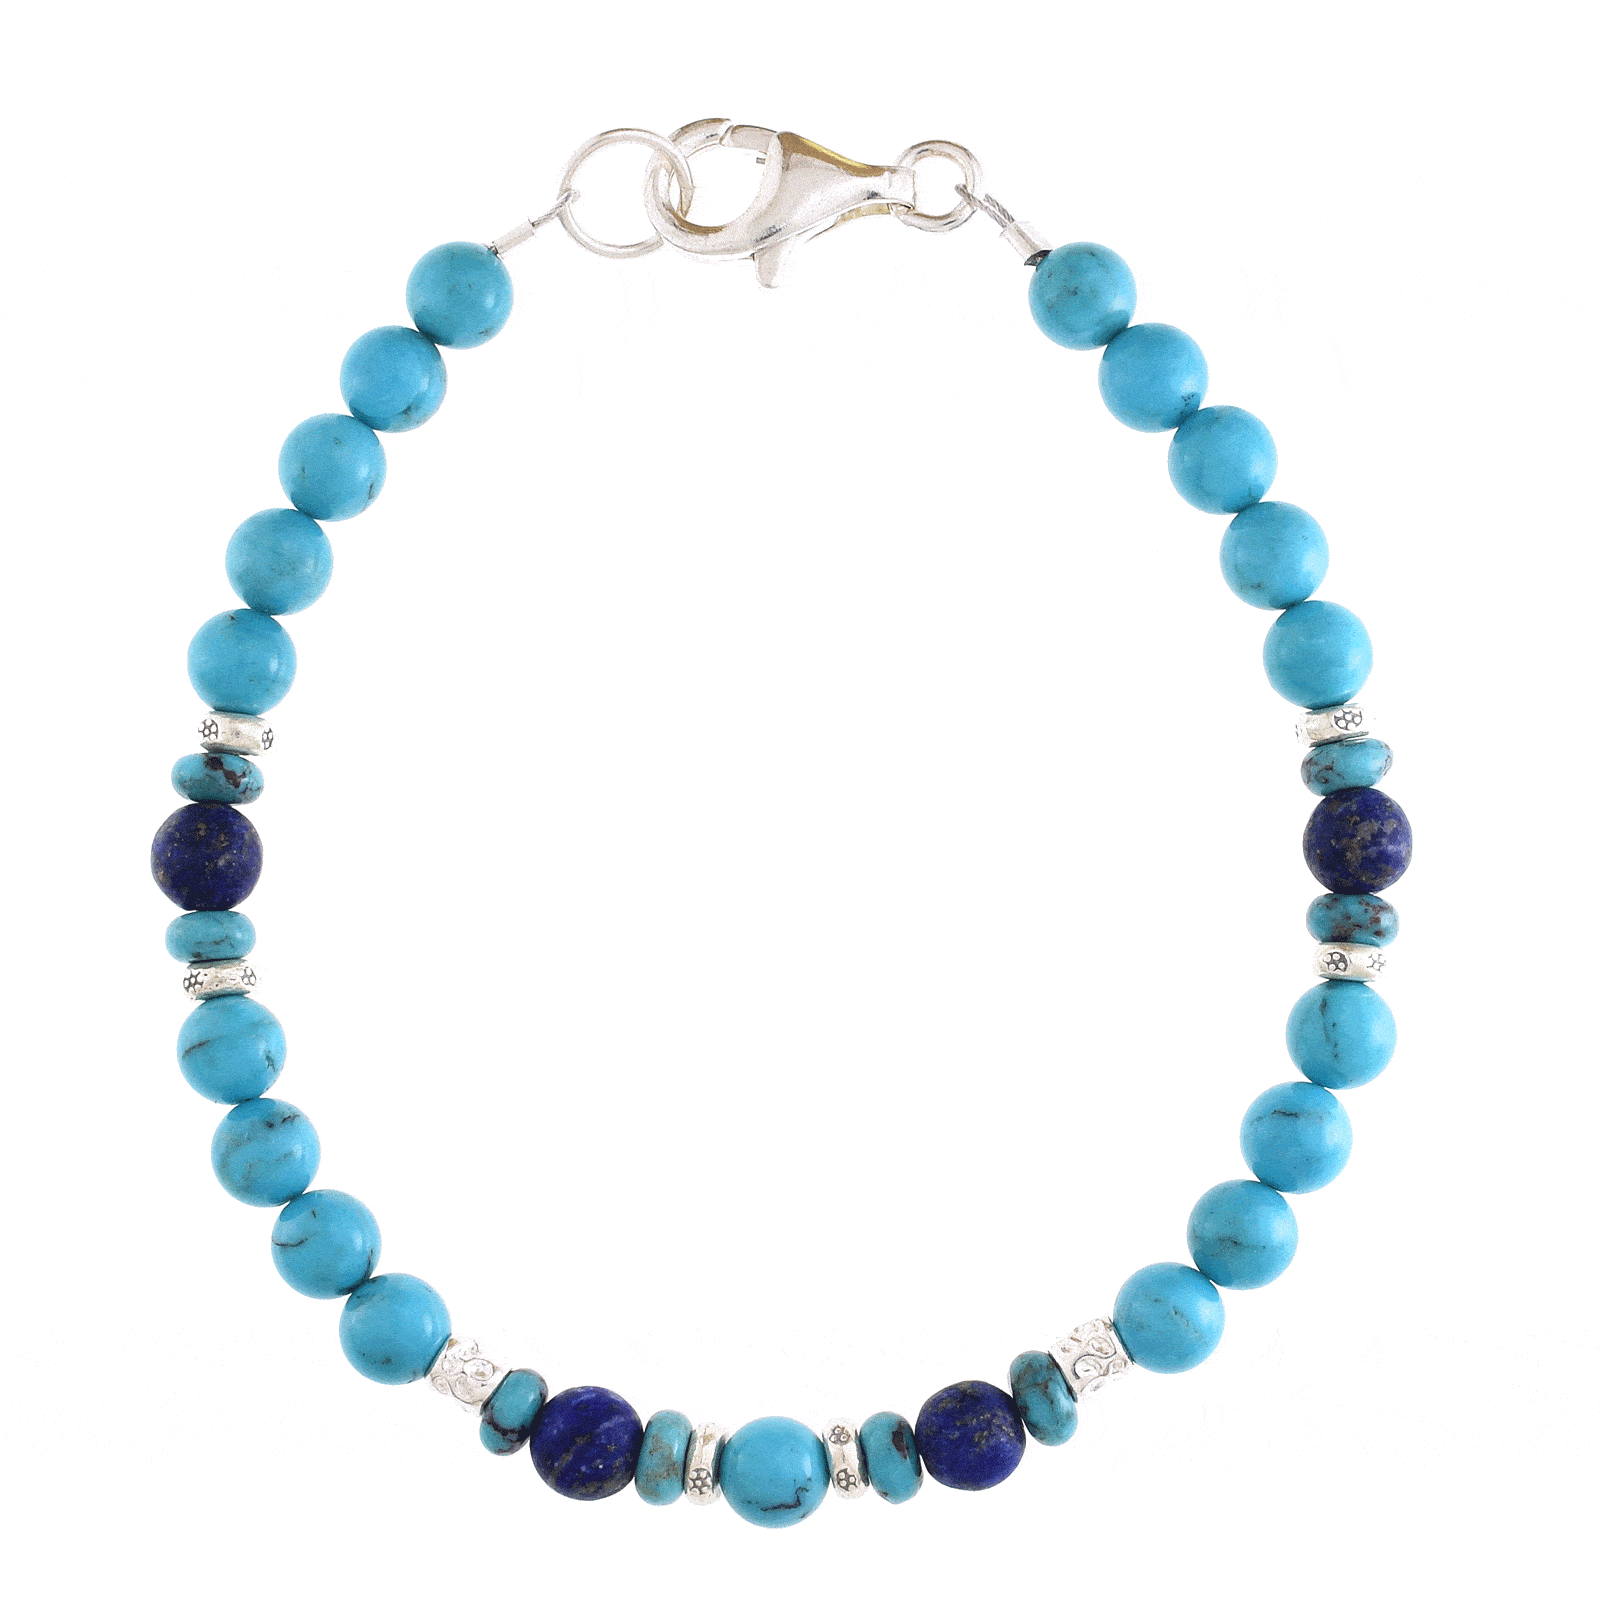 Handmade bracelet with natural Turquoise and Lapis Lazuli gemstones. The bracelet has decorative elements and clasp made of sterling silver. Buy online shop.